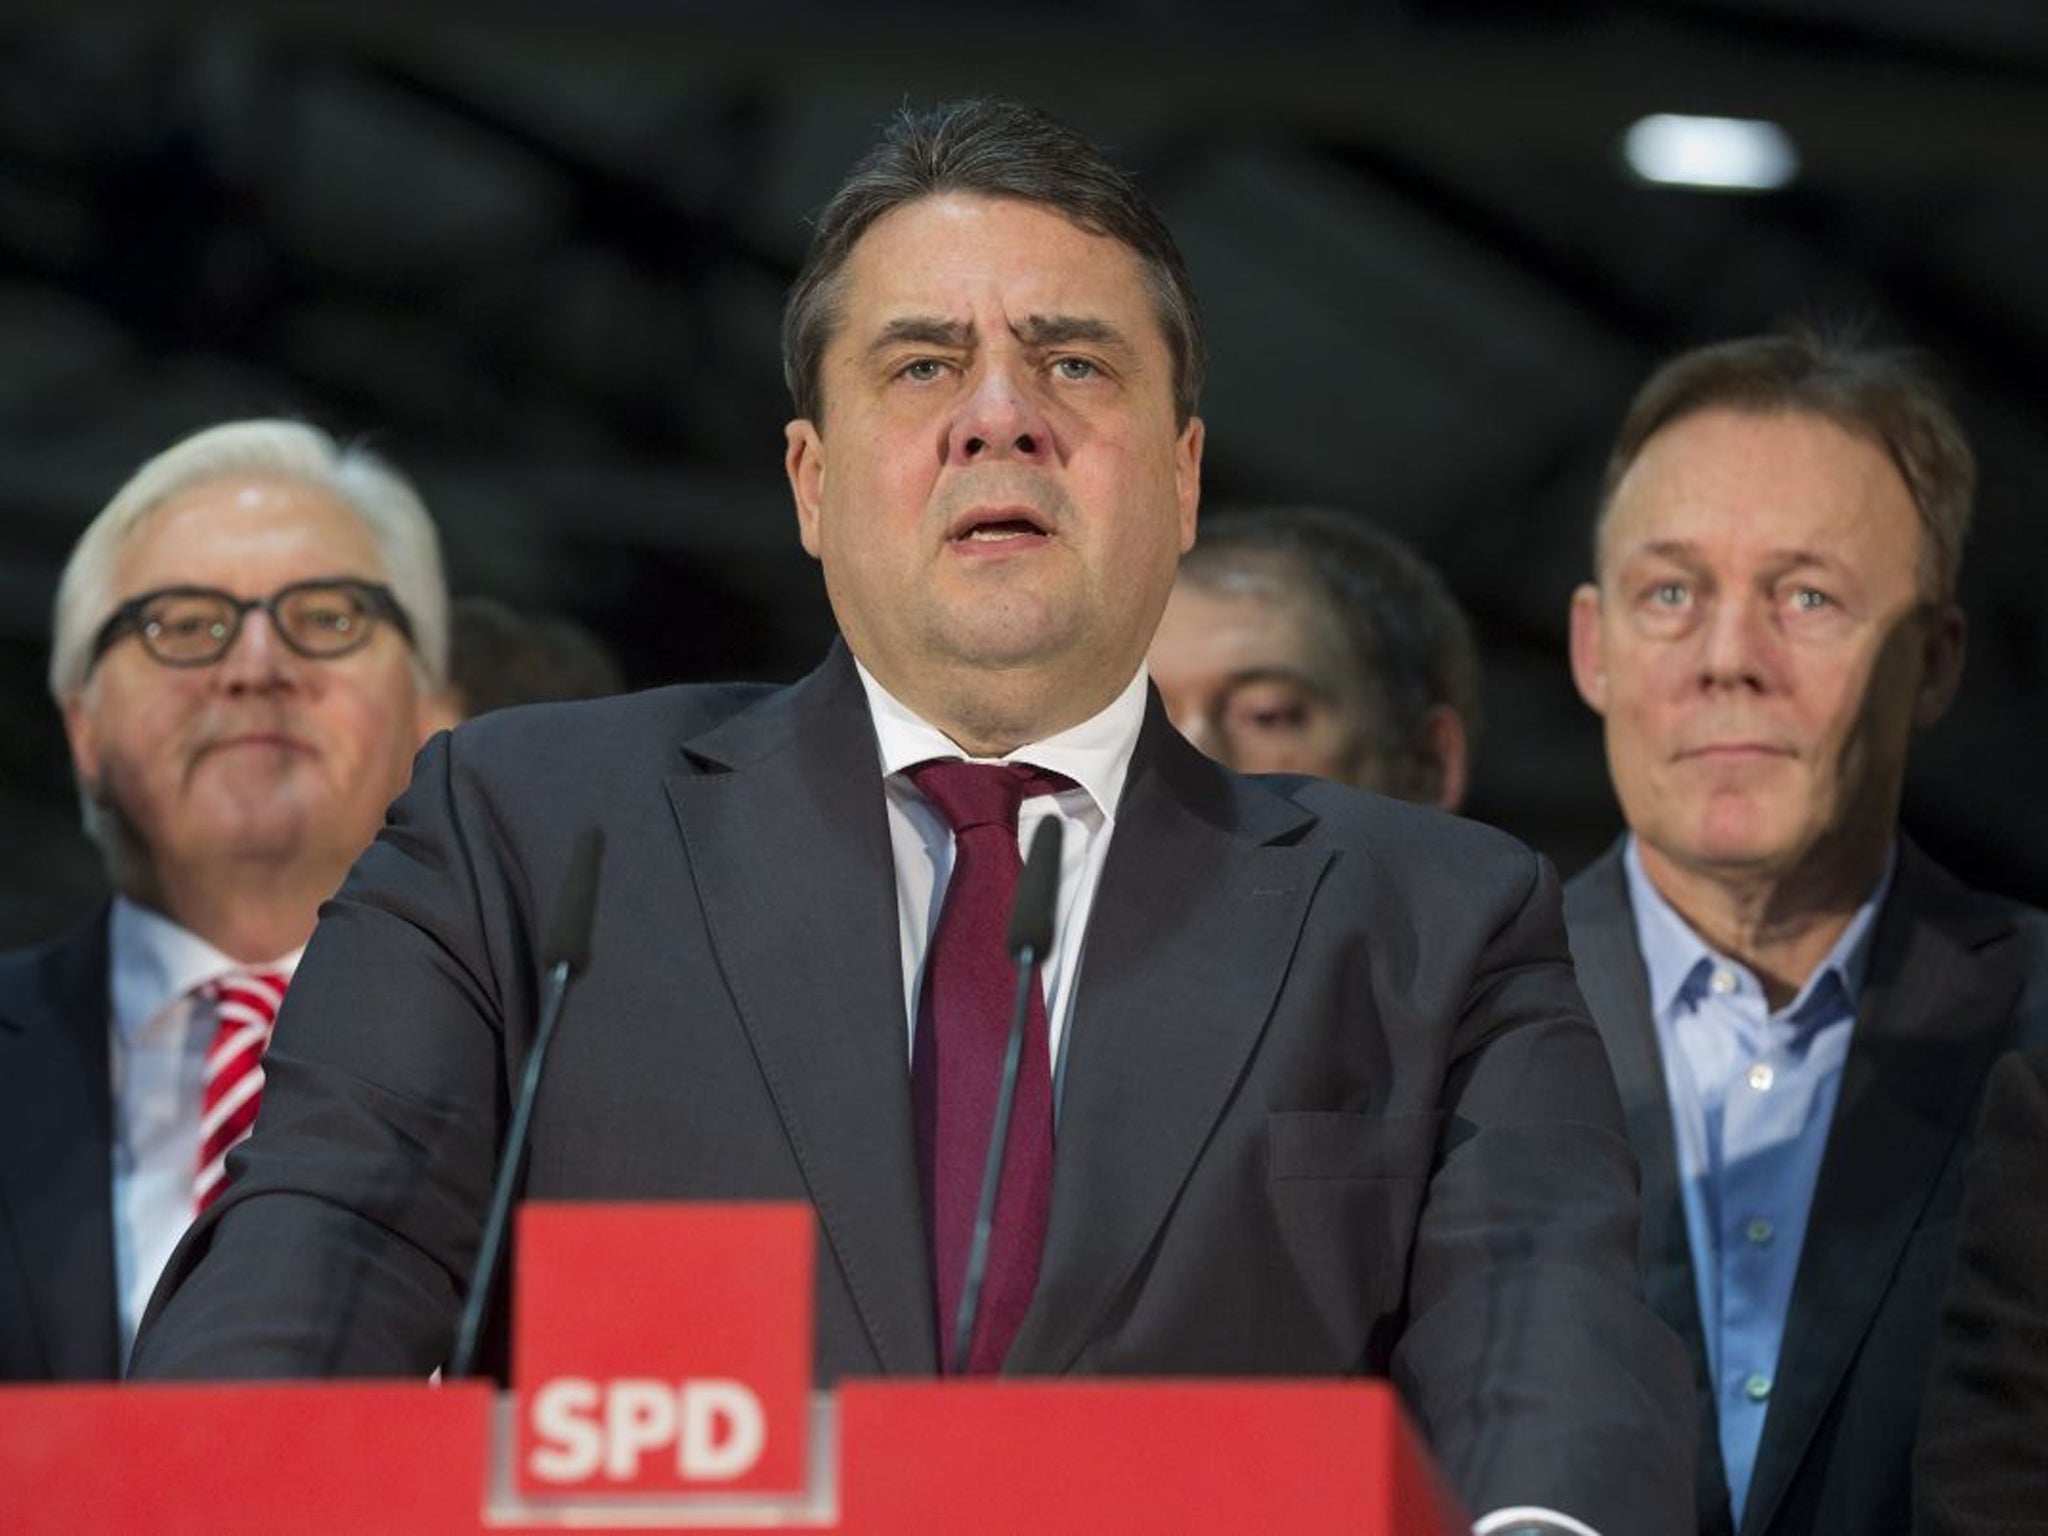 The chairman of the German Social Democratic Party (SPD), Sigmar Gabriel